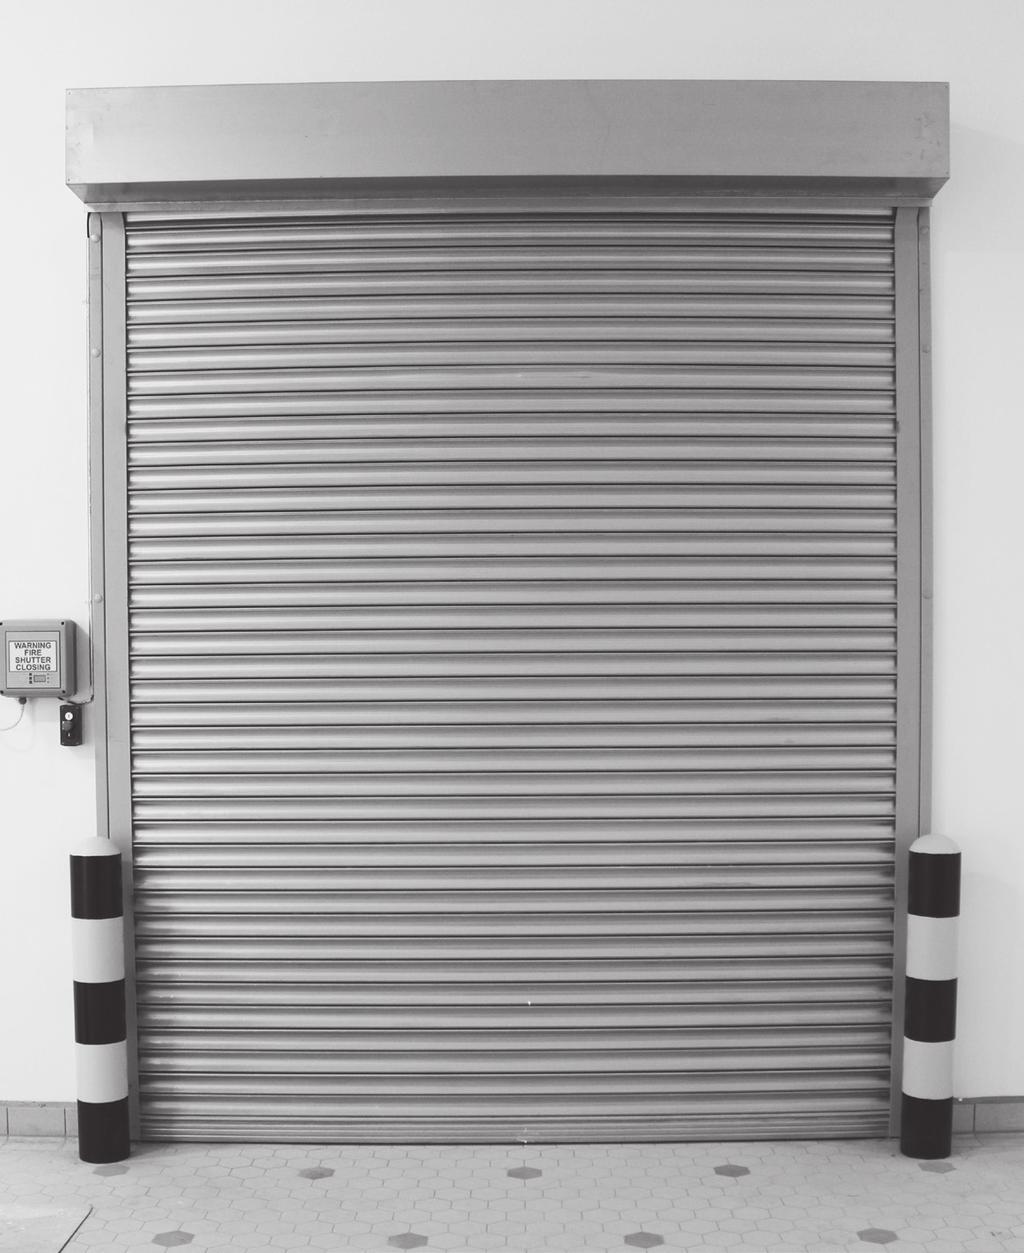 Steel Shutter, E60-60 minutes TECHNICAL SPECIFICATIONS: DIMENSIONS Max. W 6 m x H 6 m.